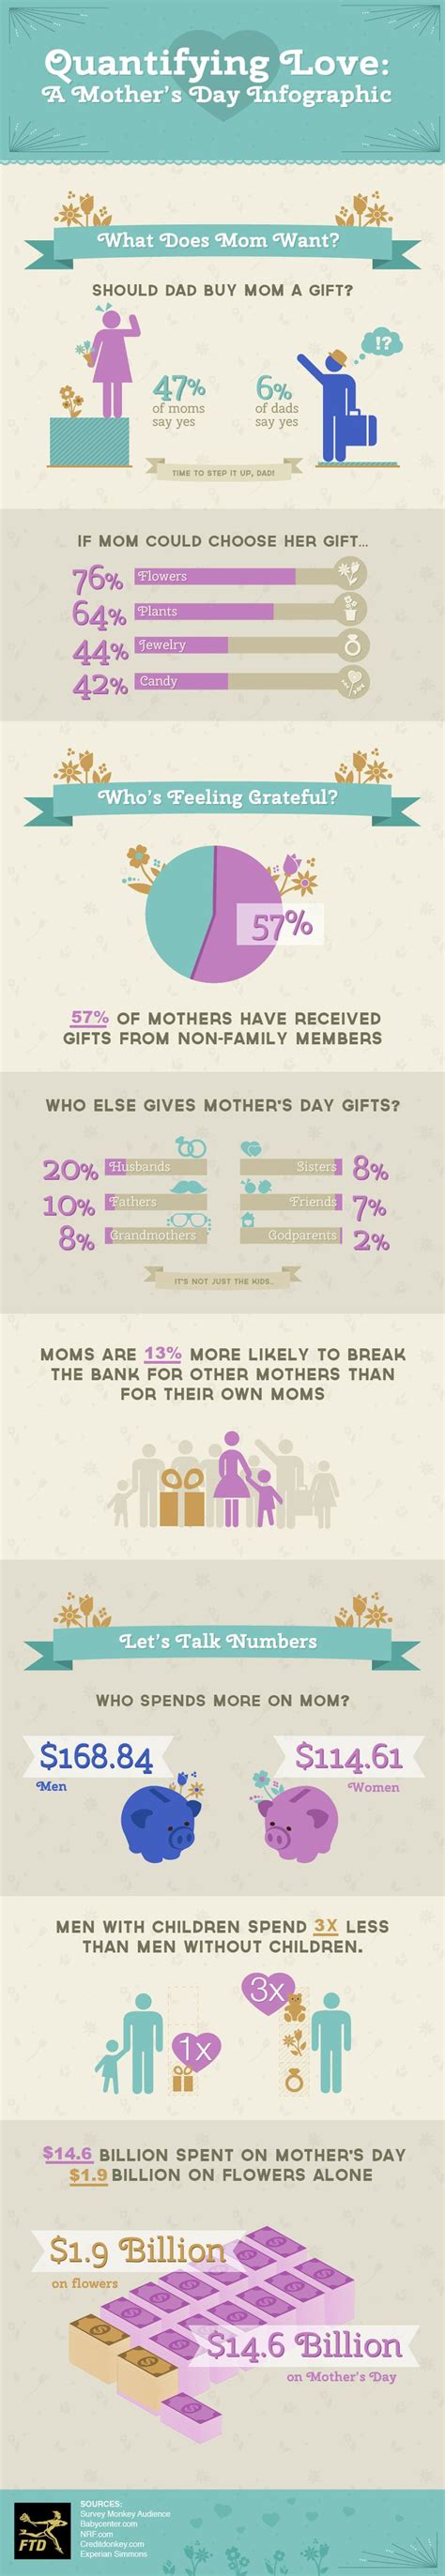 quantifying love a mother s day infographic [infographic] infographic mothers day presents